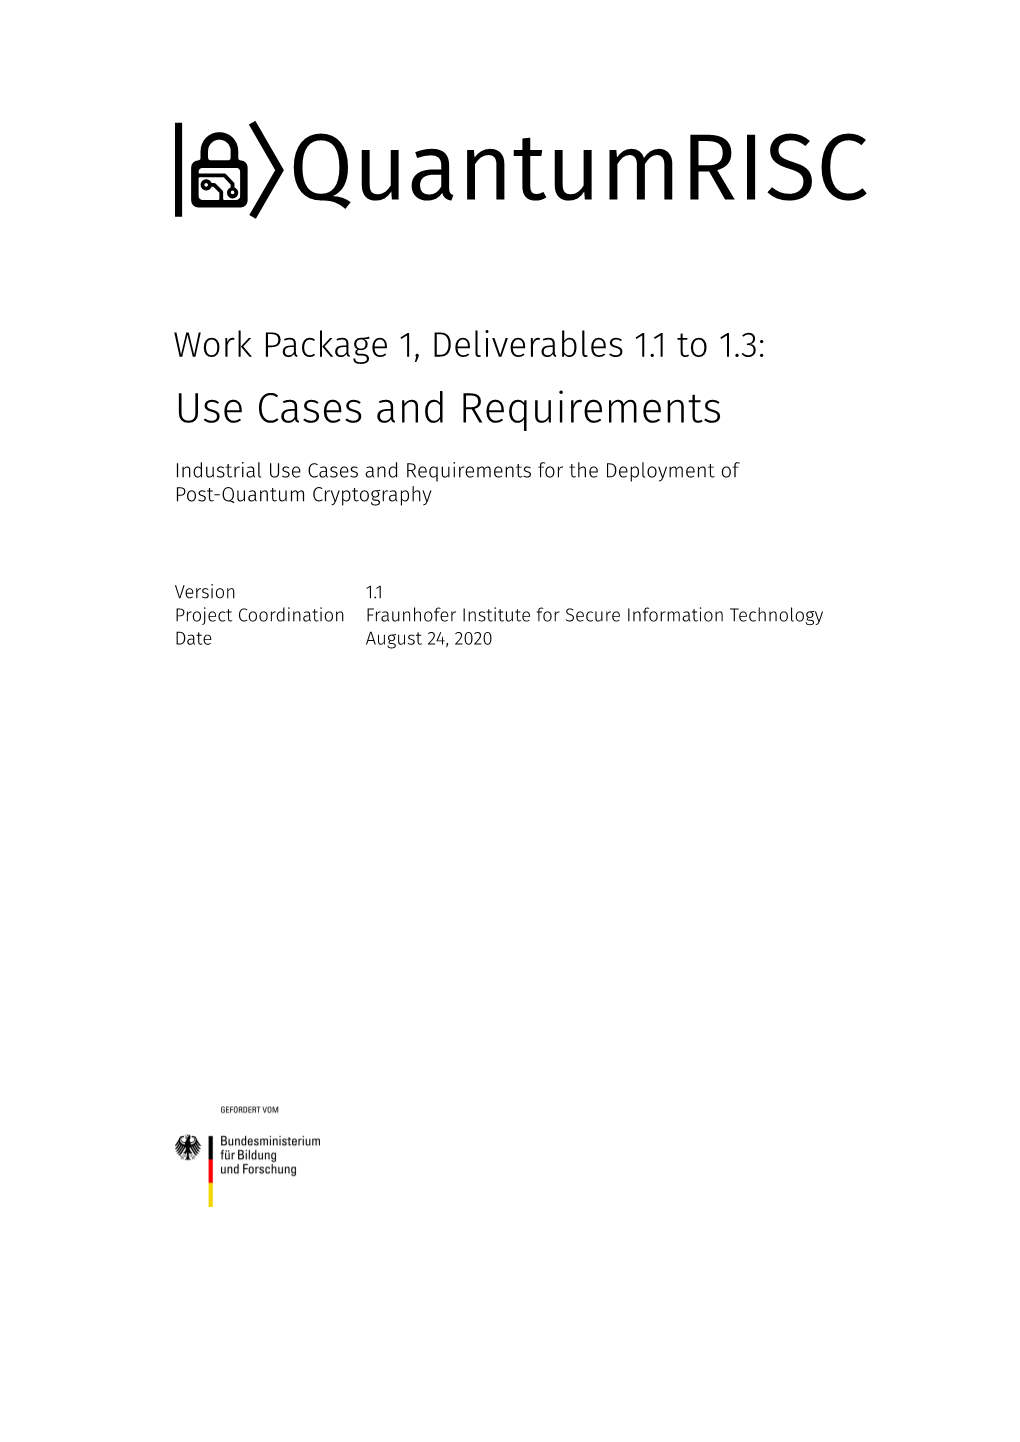 Use Cases and Requirements